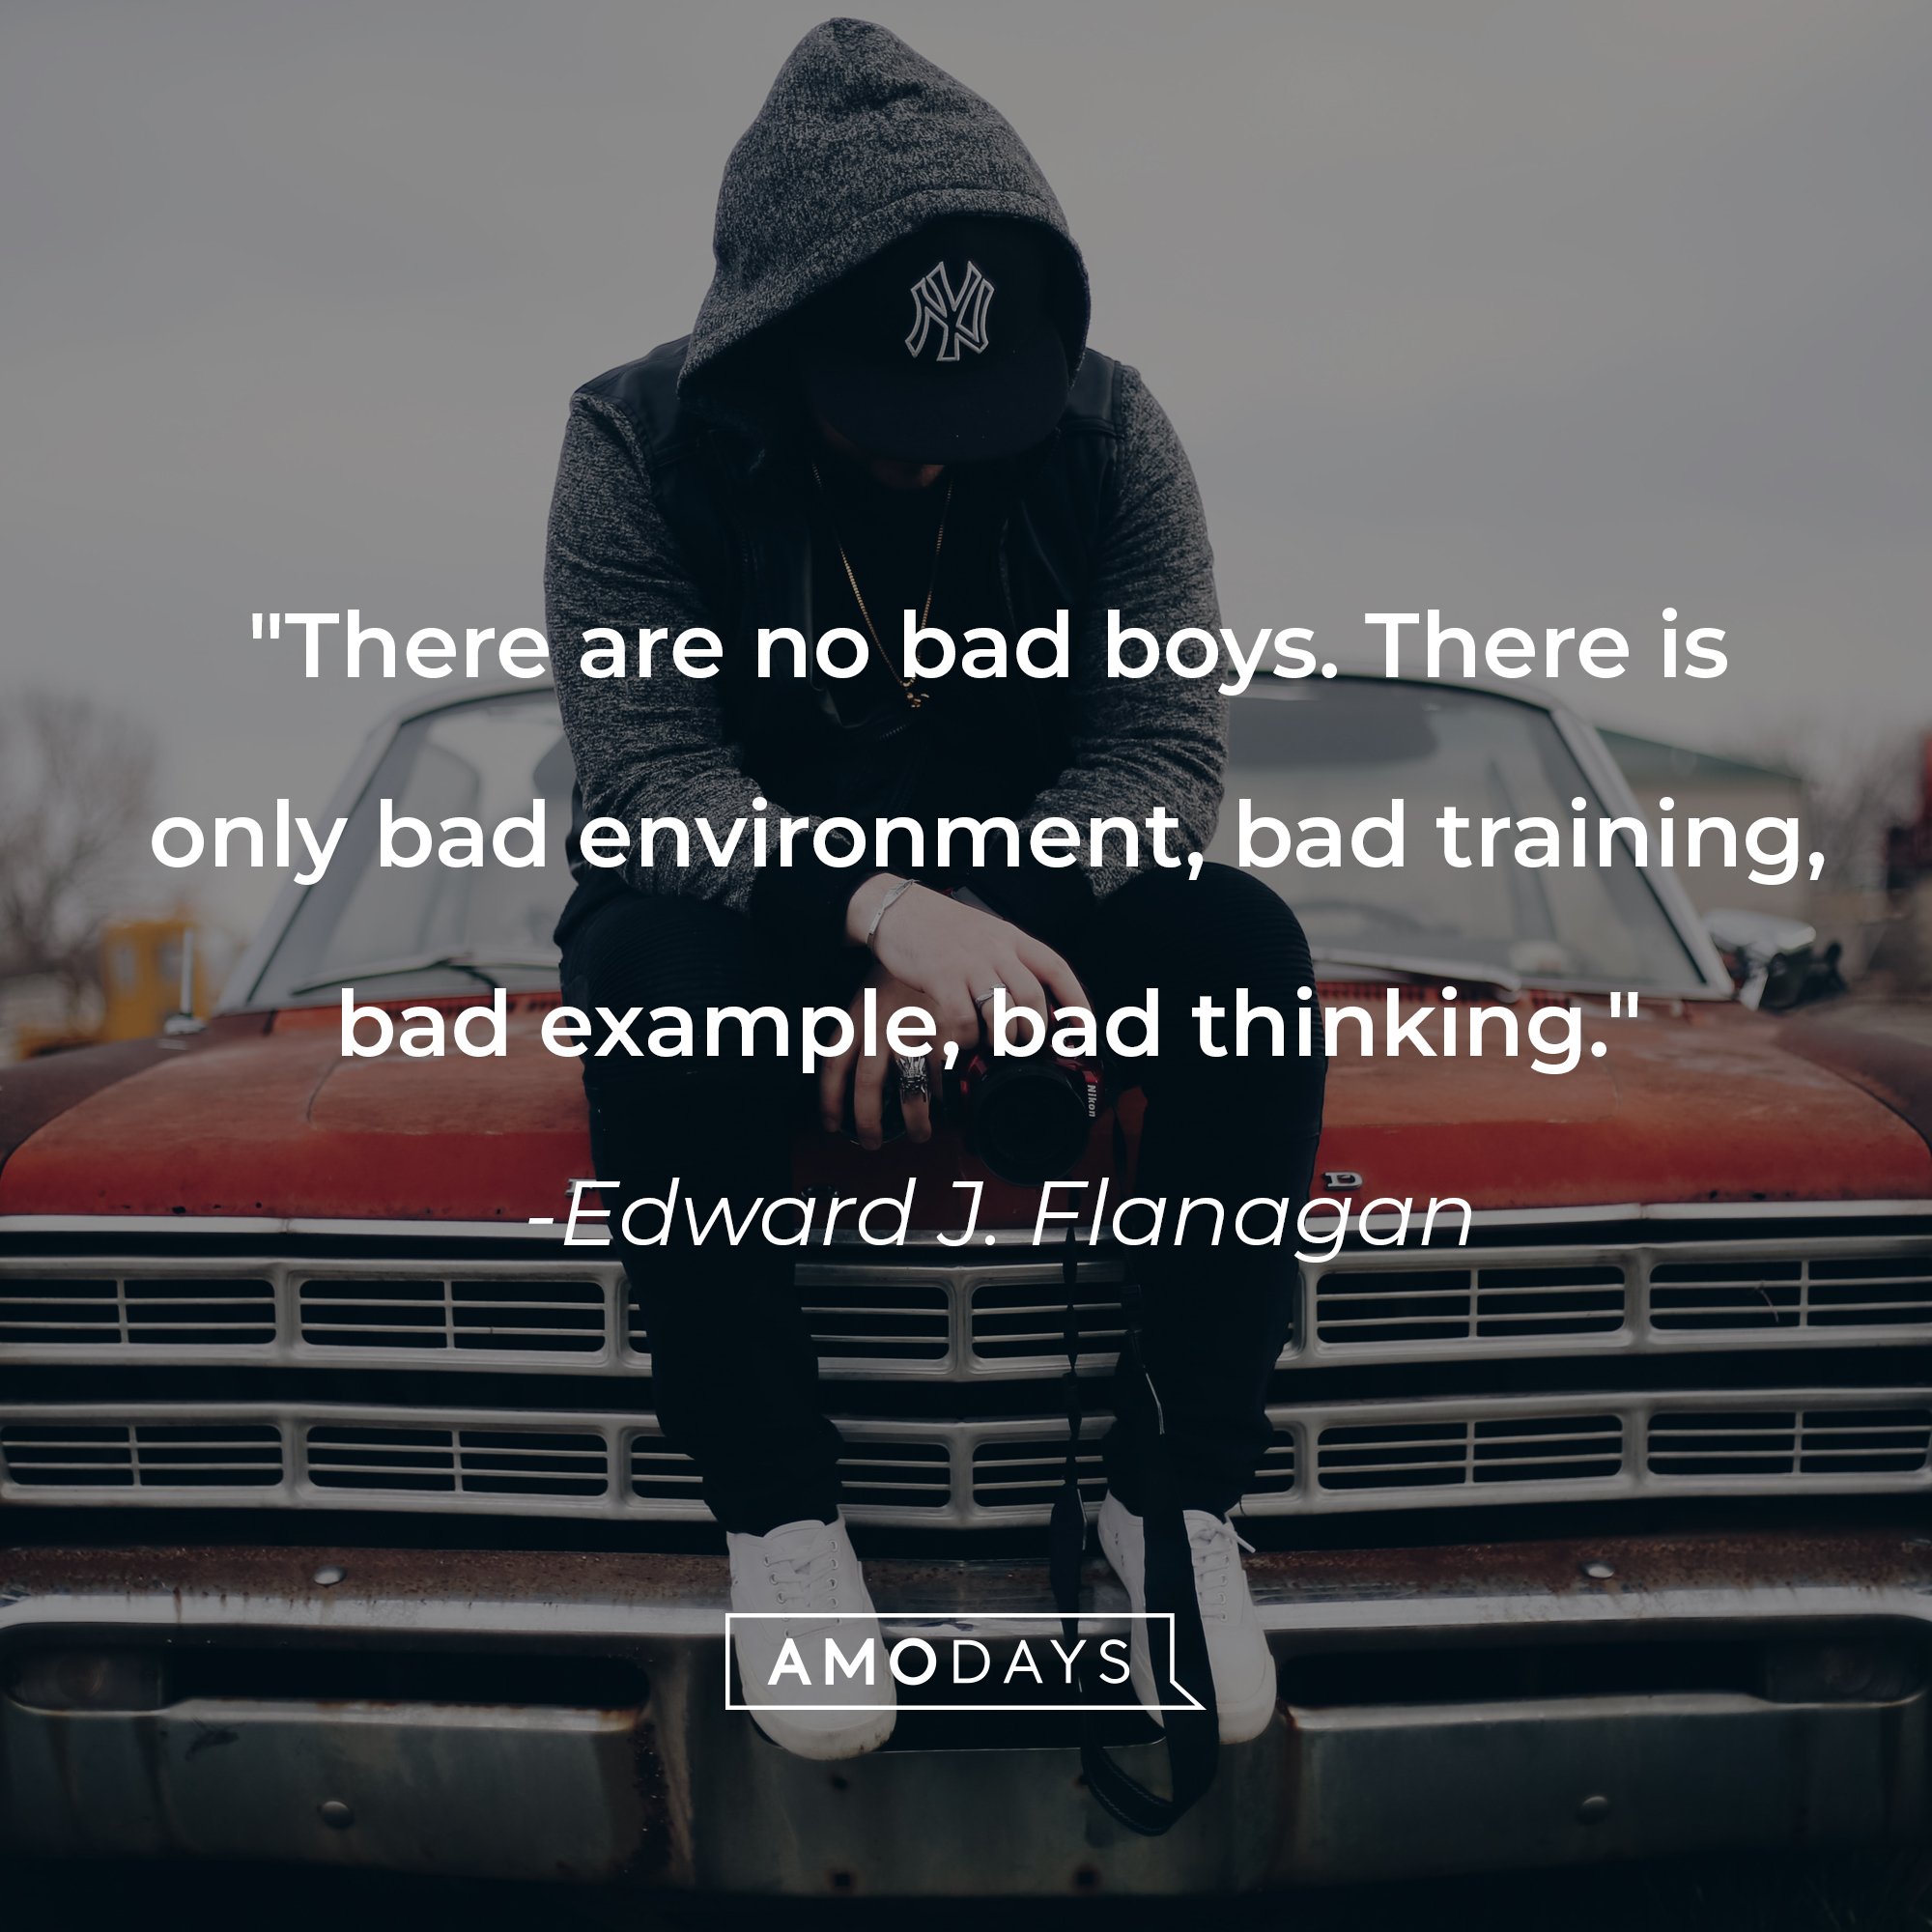 Edward J. Flanagan's quote: "There are no bad boys. There is only bad environment, bad training, bad example, bad thinking." | Image: AmoDays